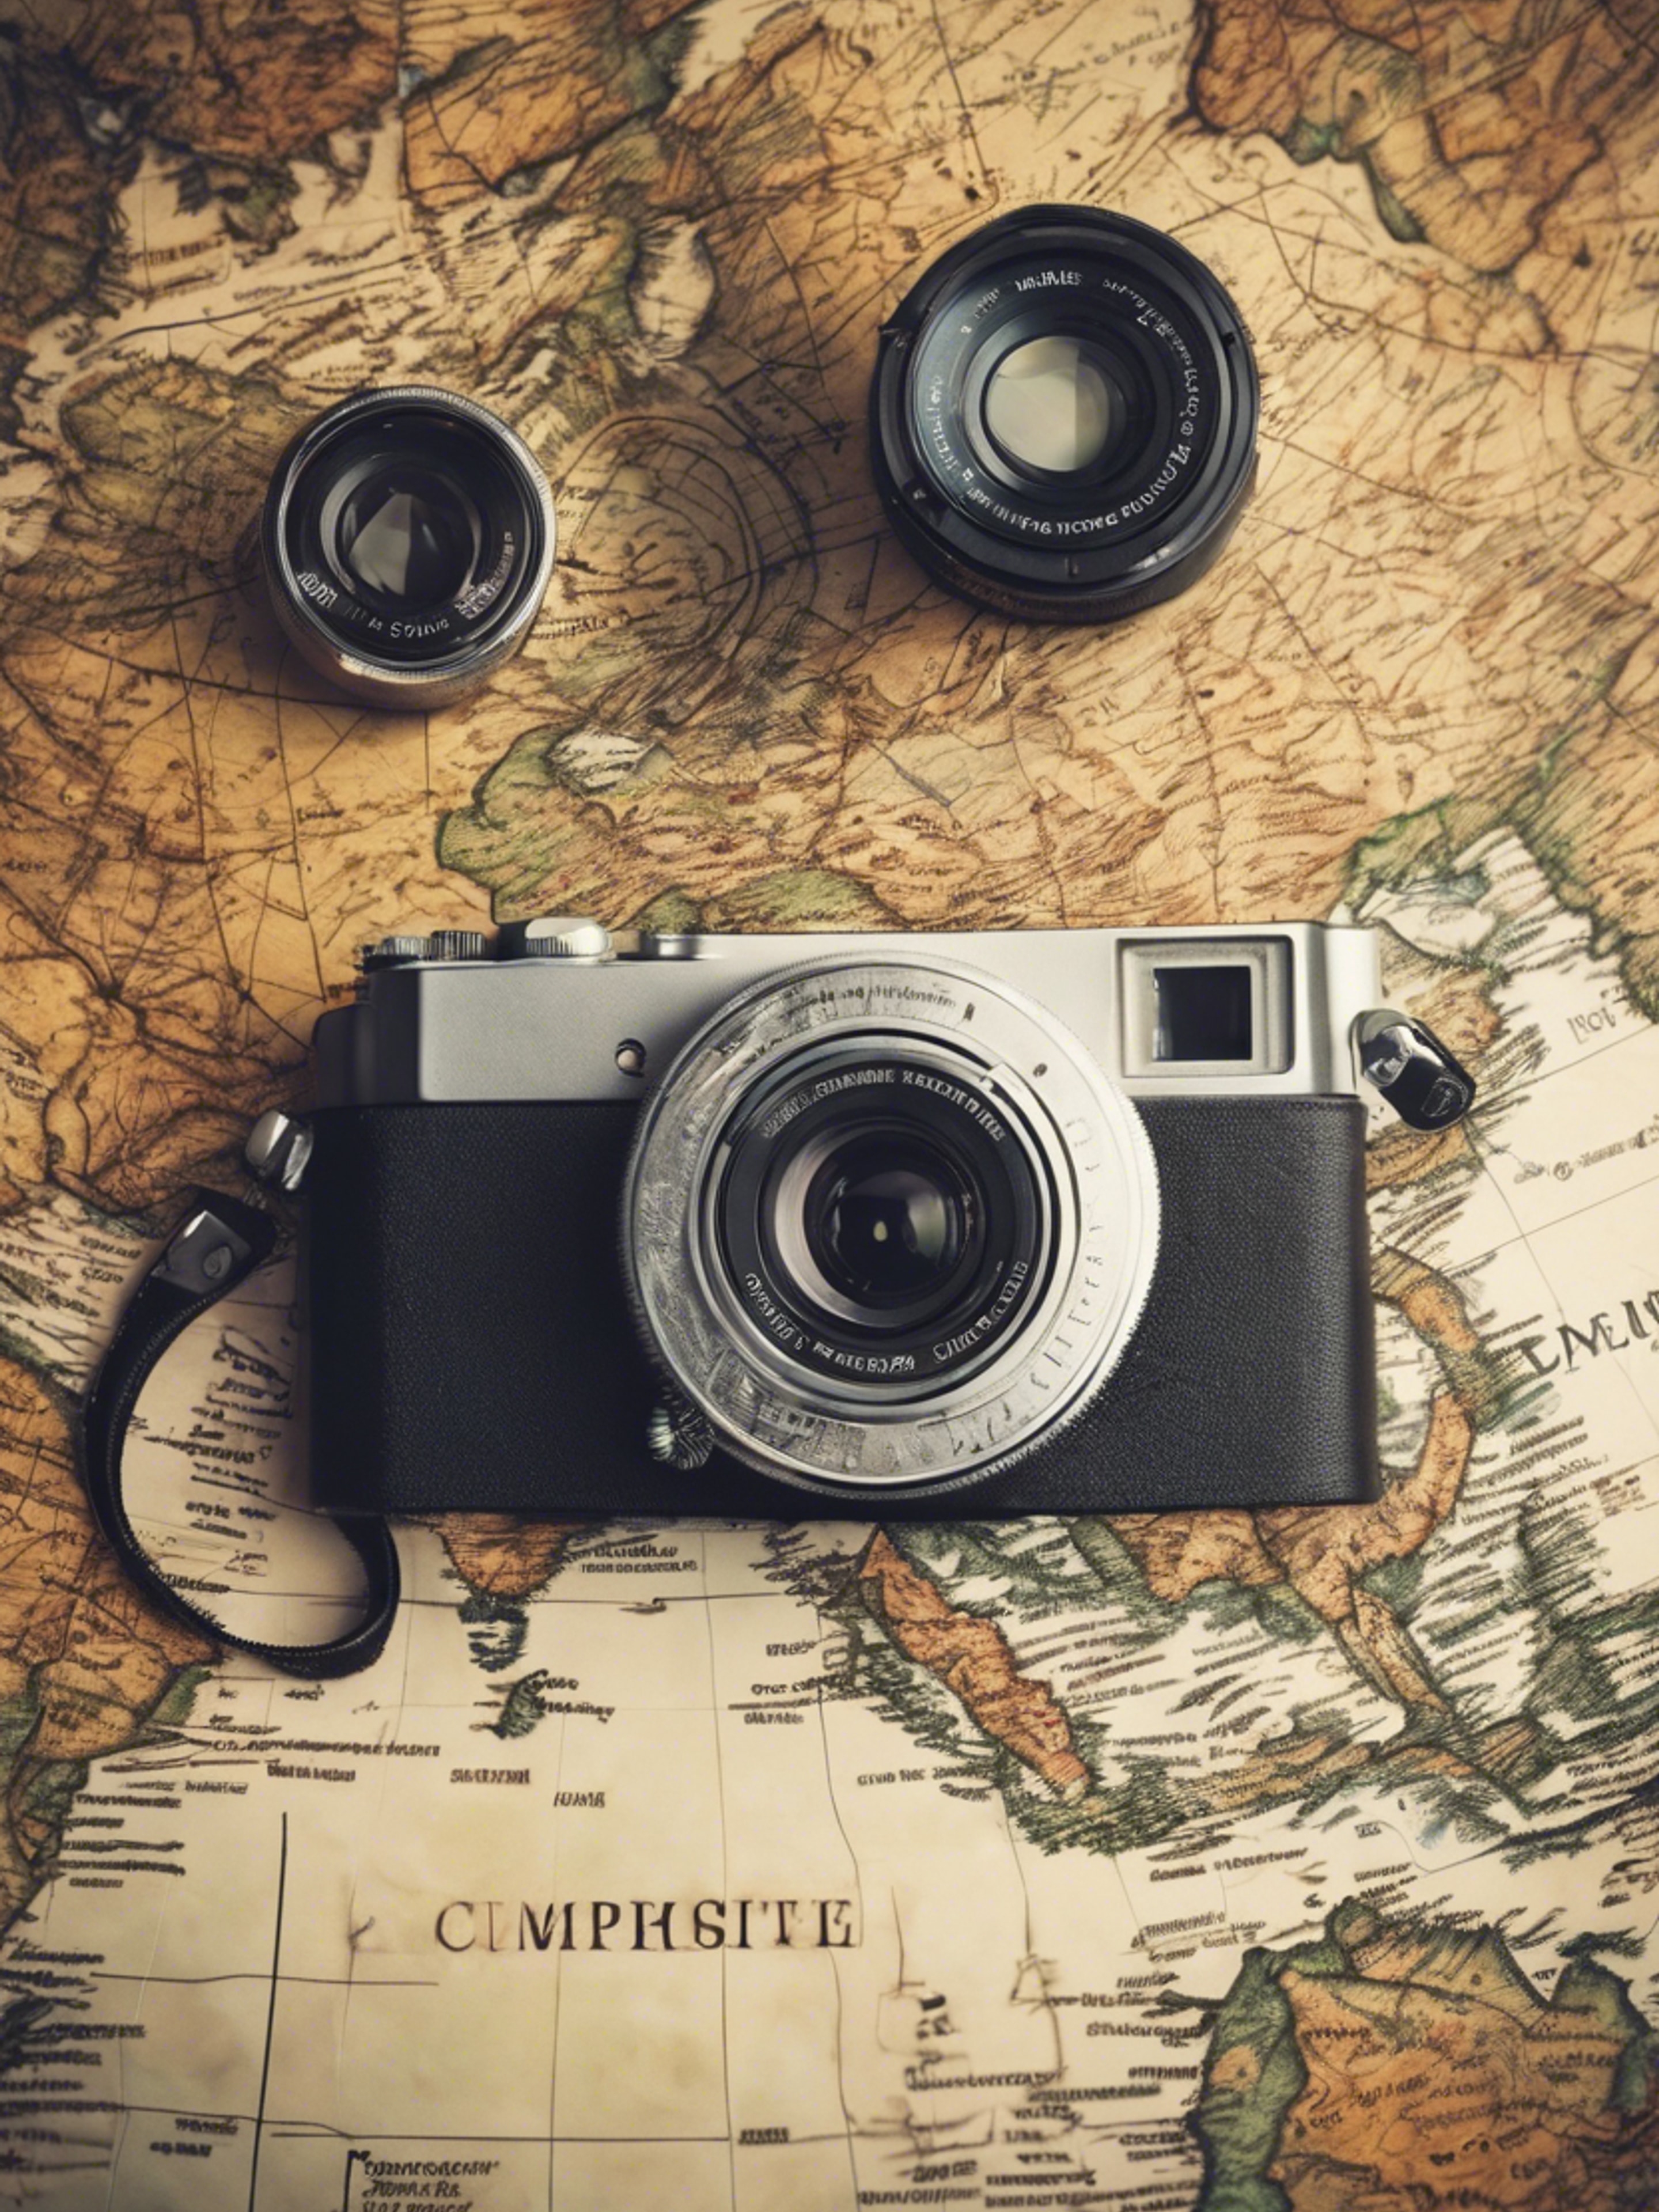 A compact camera with vintage design, placed on a world map to convey the spirit of travel. Ფონი[89e32525bdc346769ef4]